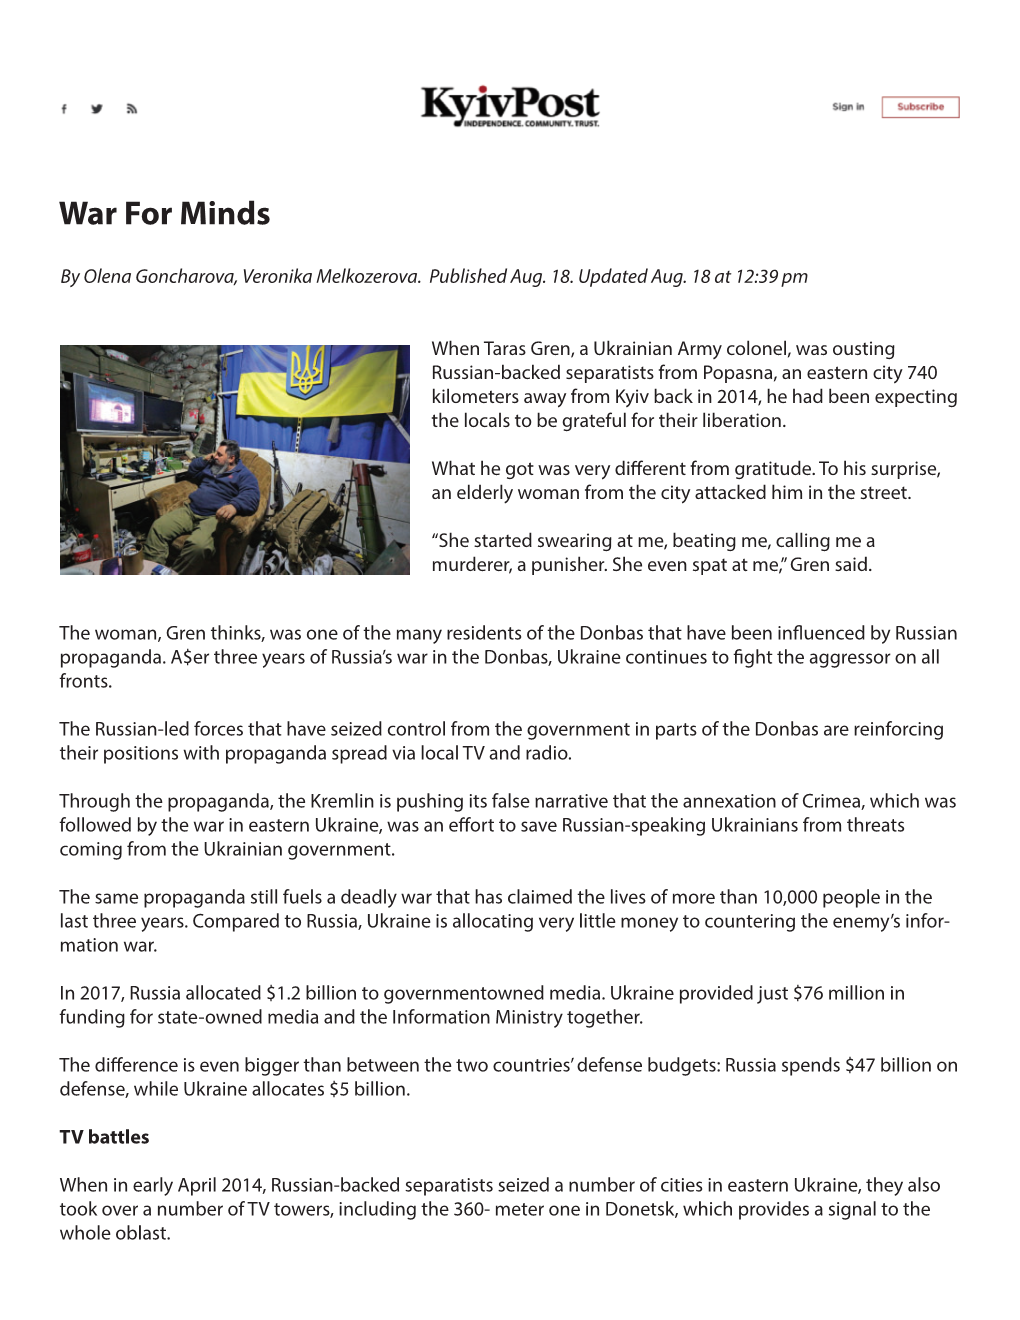 War for Minds Article